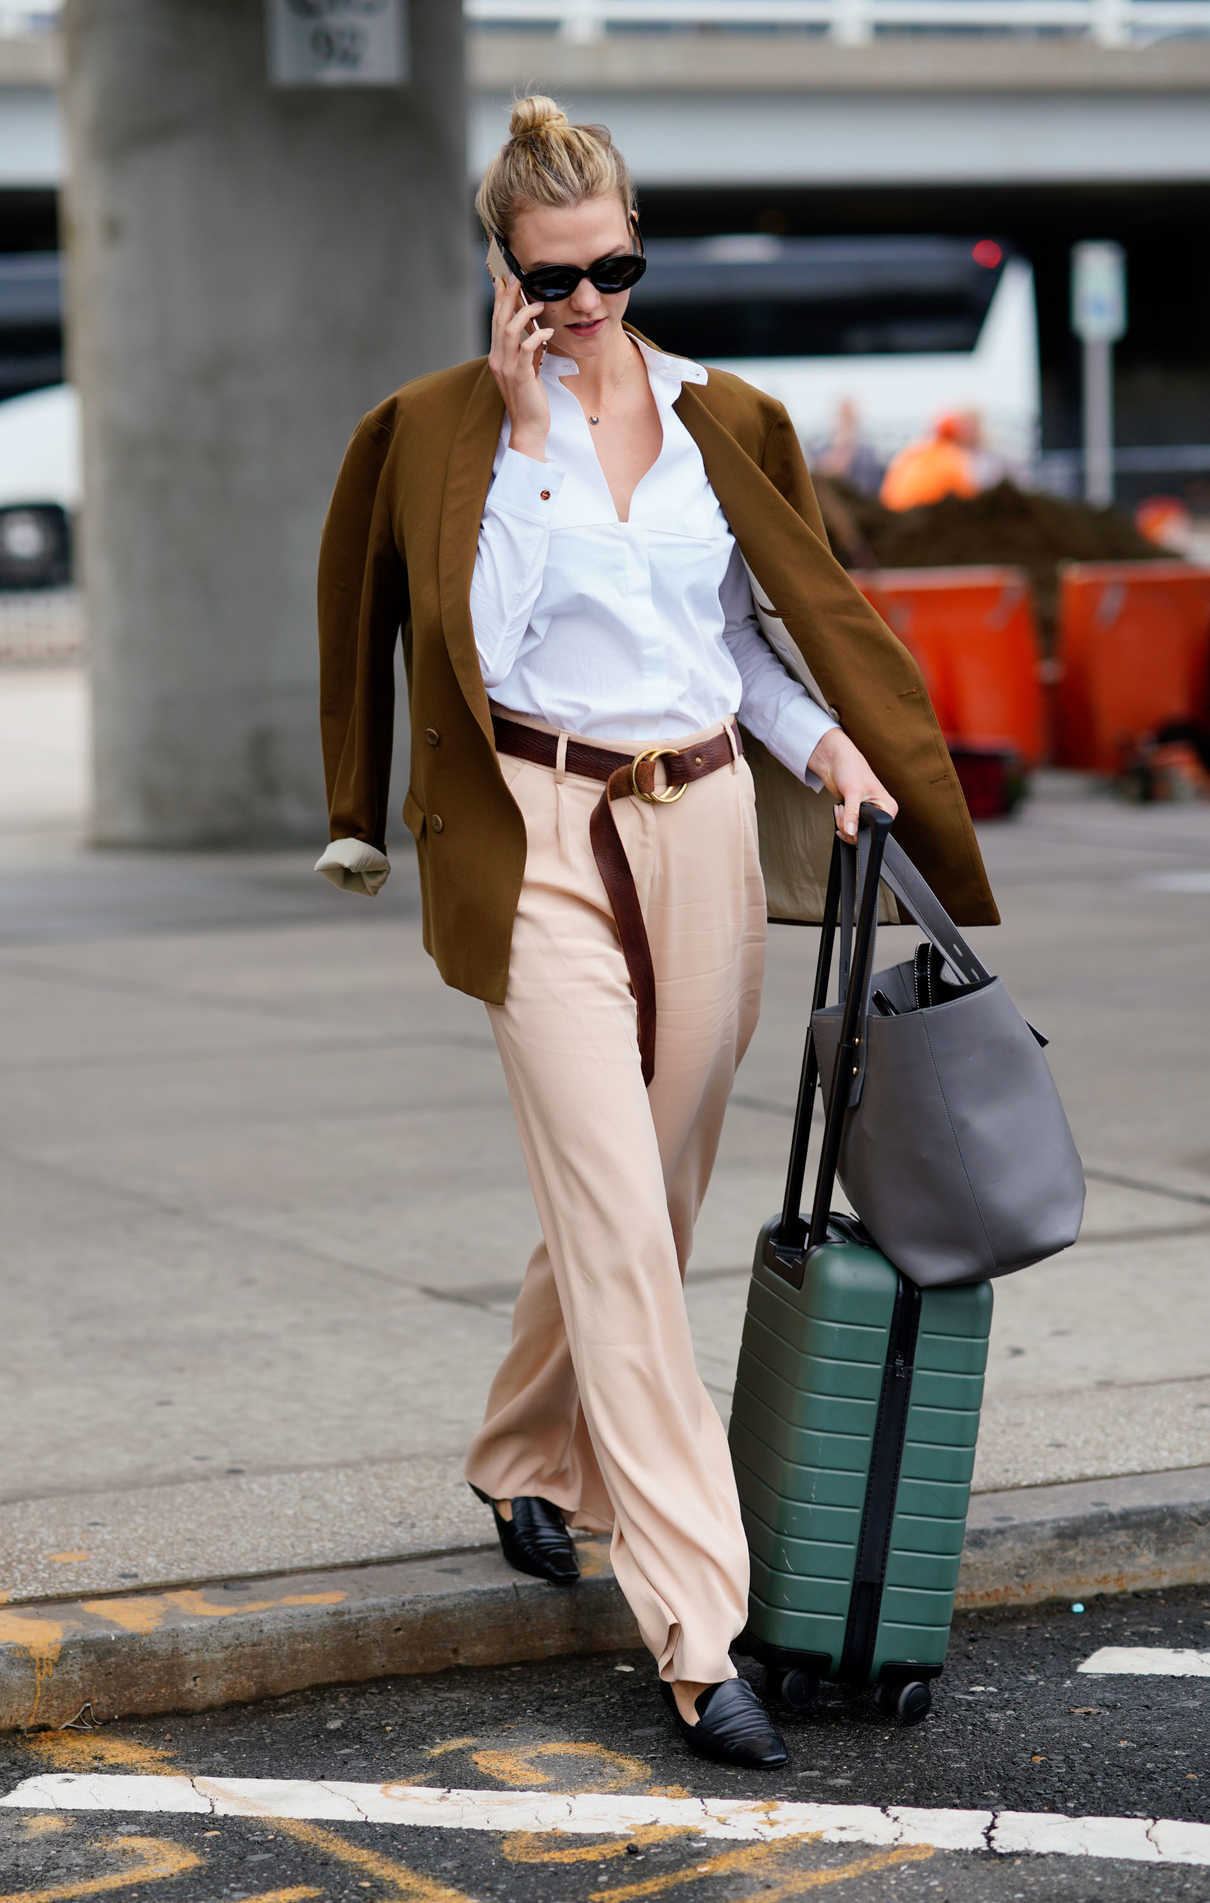 Karlie Kloss in a White Blouse Touches Down at JFK Airport in NYC 09/28 ...